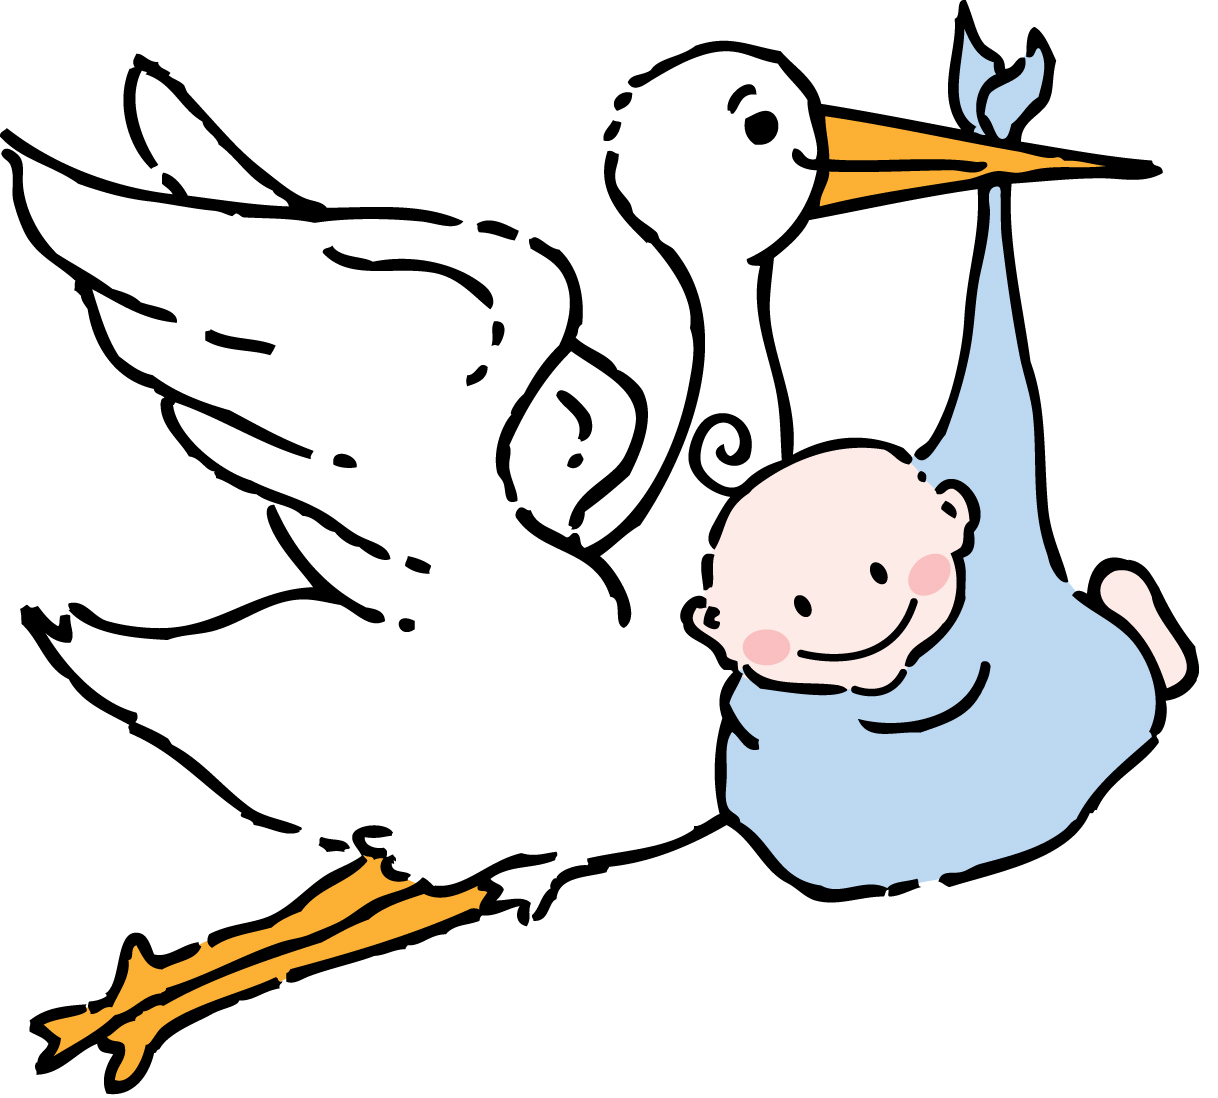 Baby Stork Clip Art | Photo Galleries | The World's Best Images ...